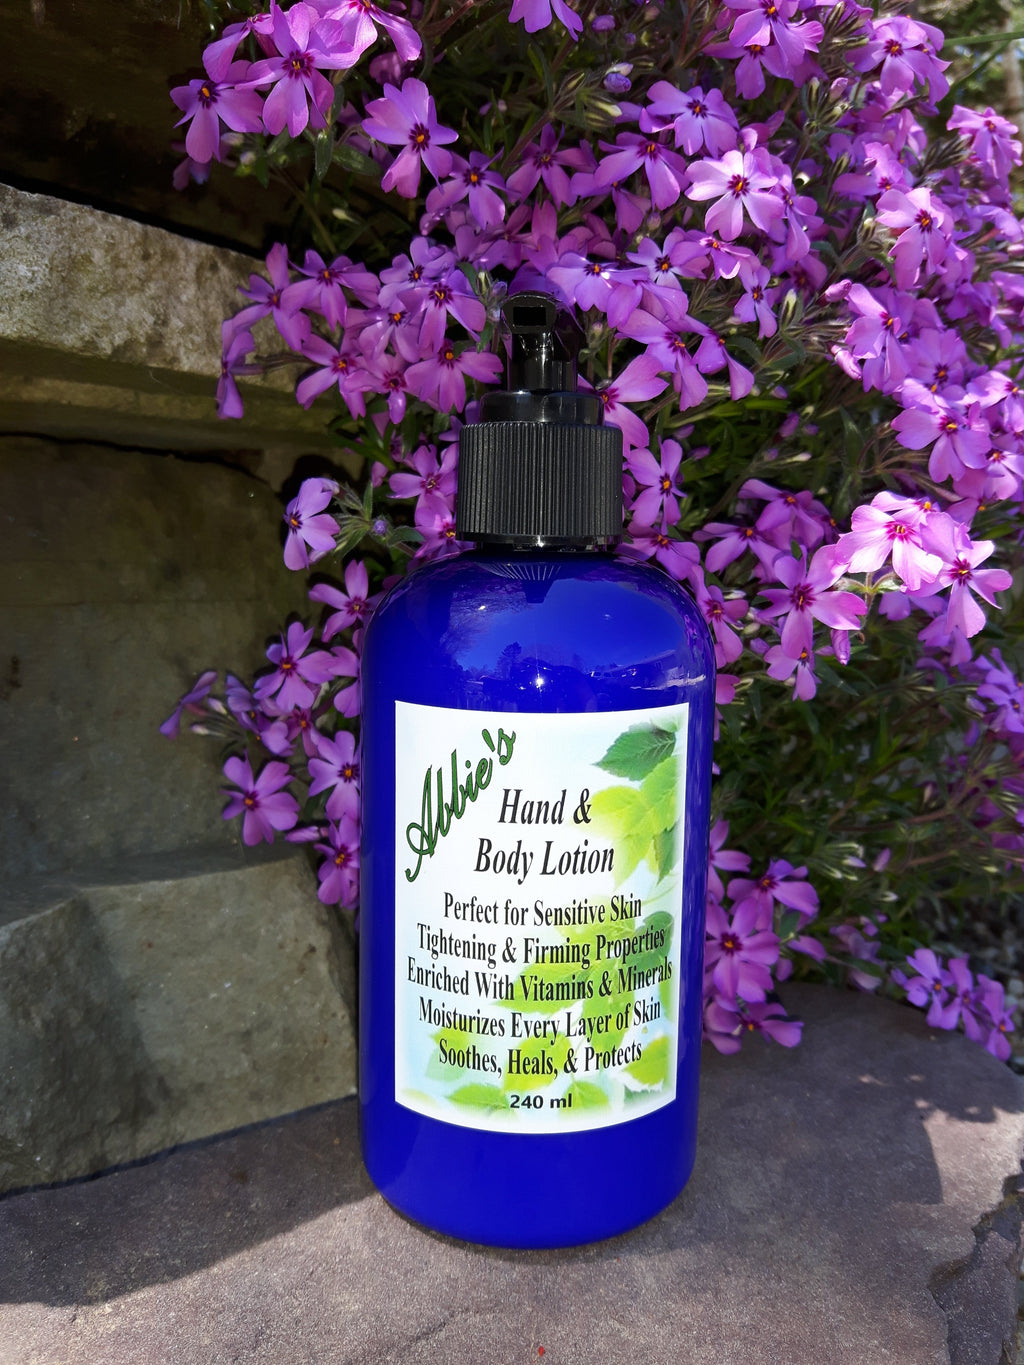 Hand & Body Lotion 240ml - Abbie's Natural Skin Care Products